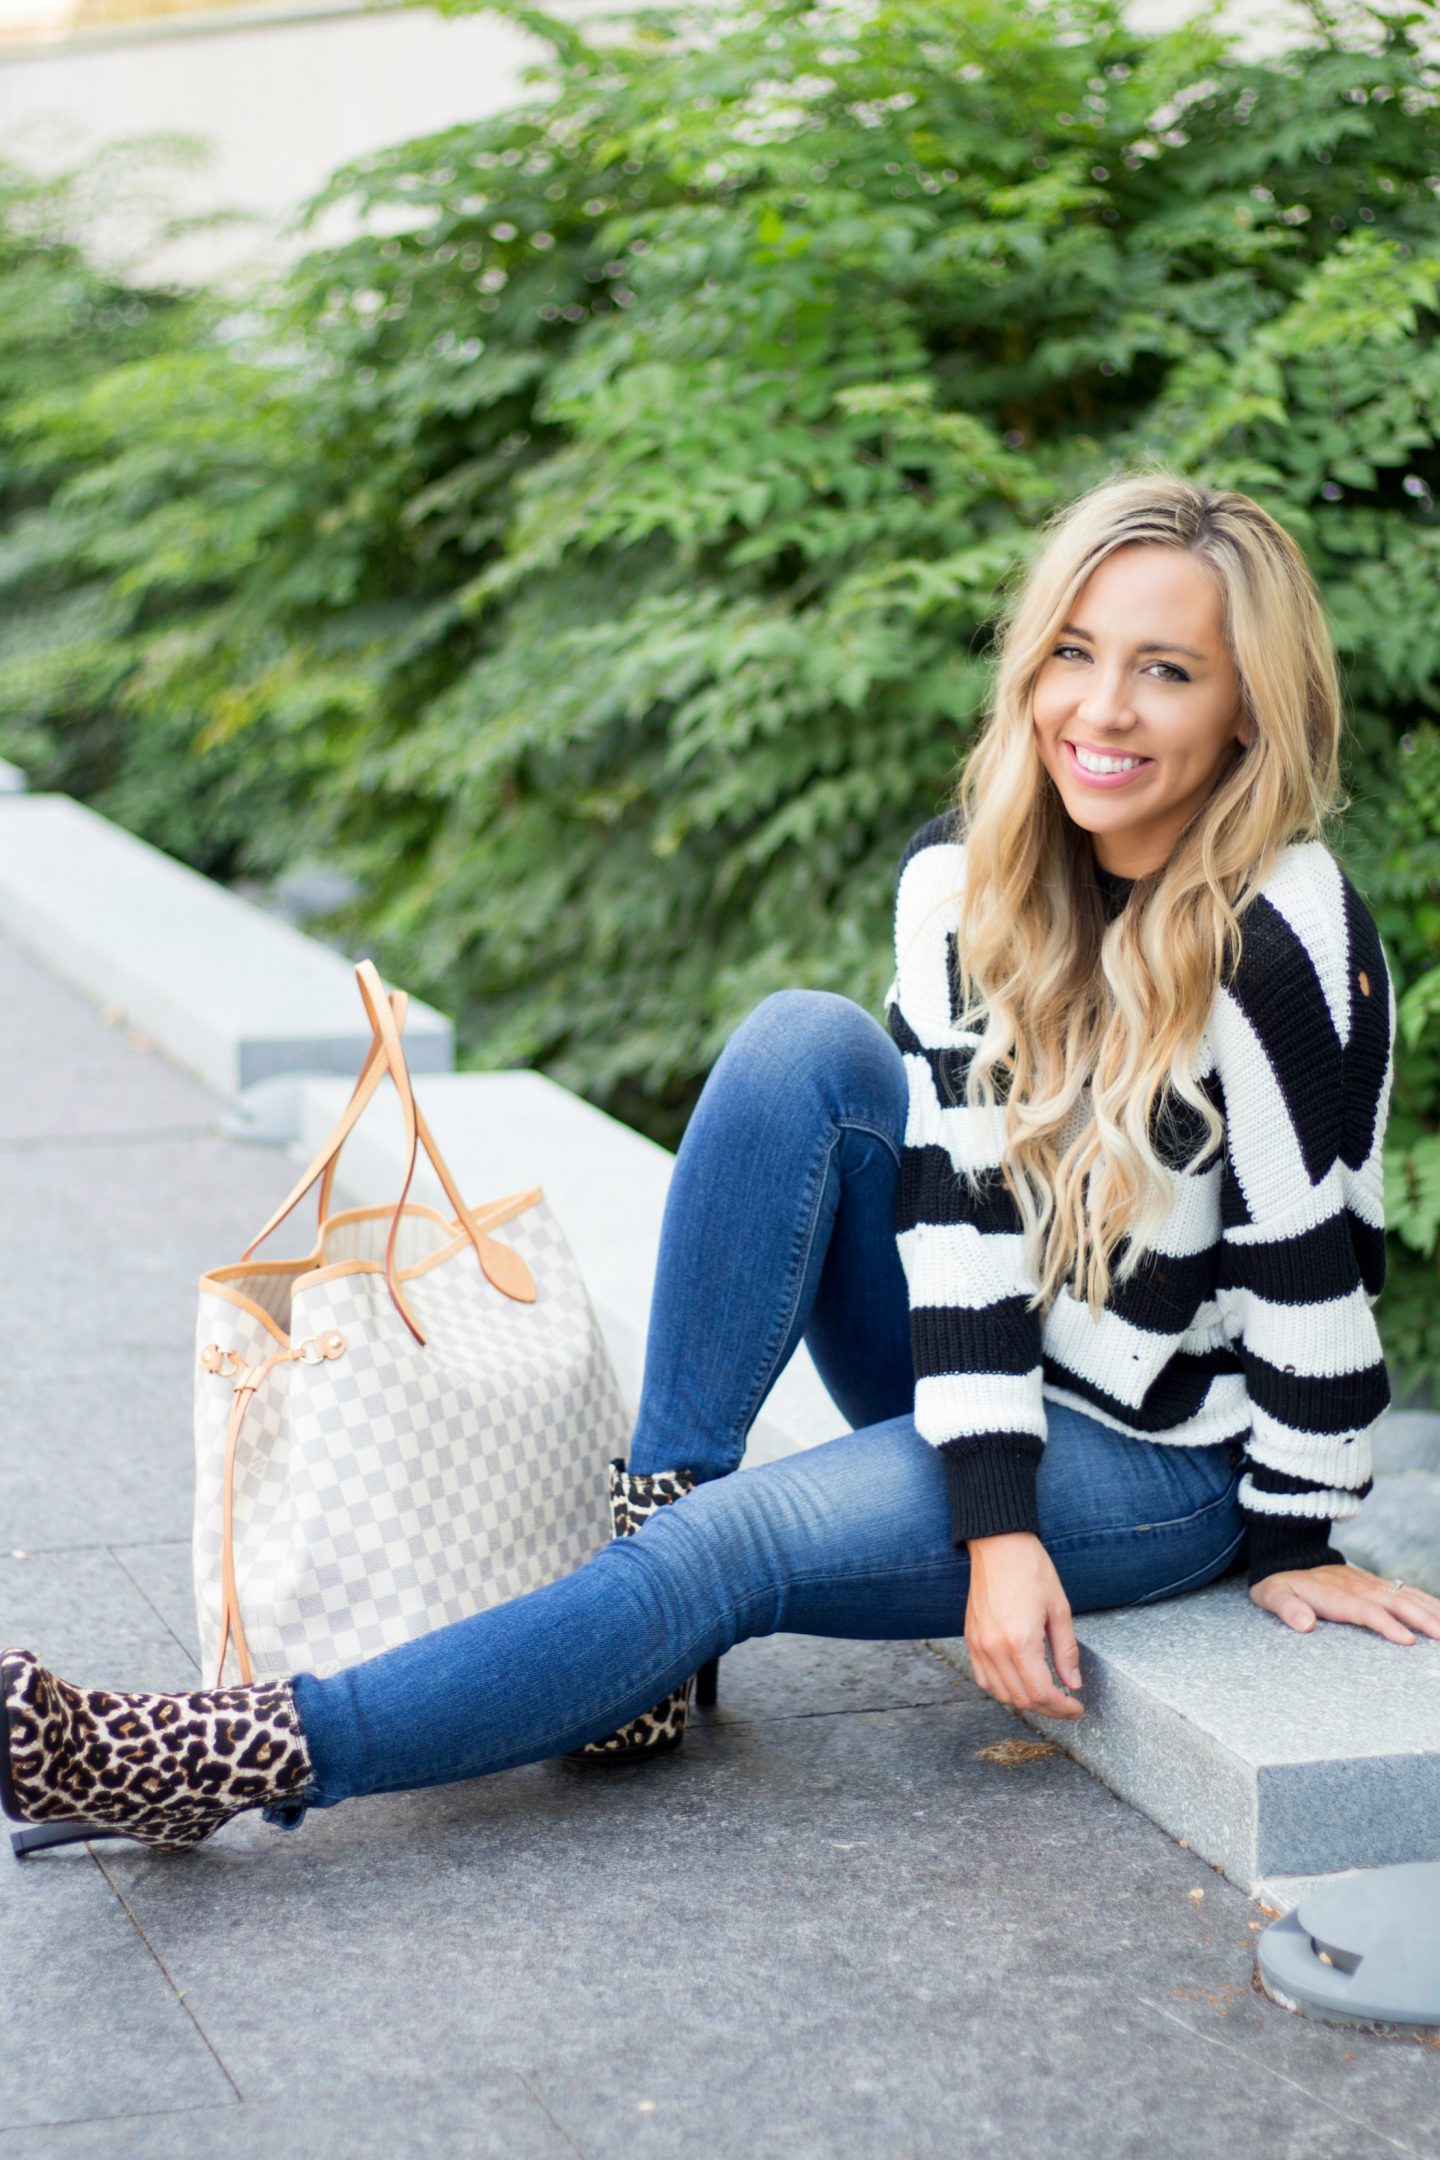 $20 Striped Pullover & Leopard Print Booties - According to Blaire